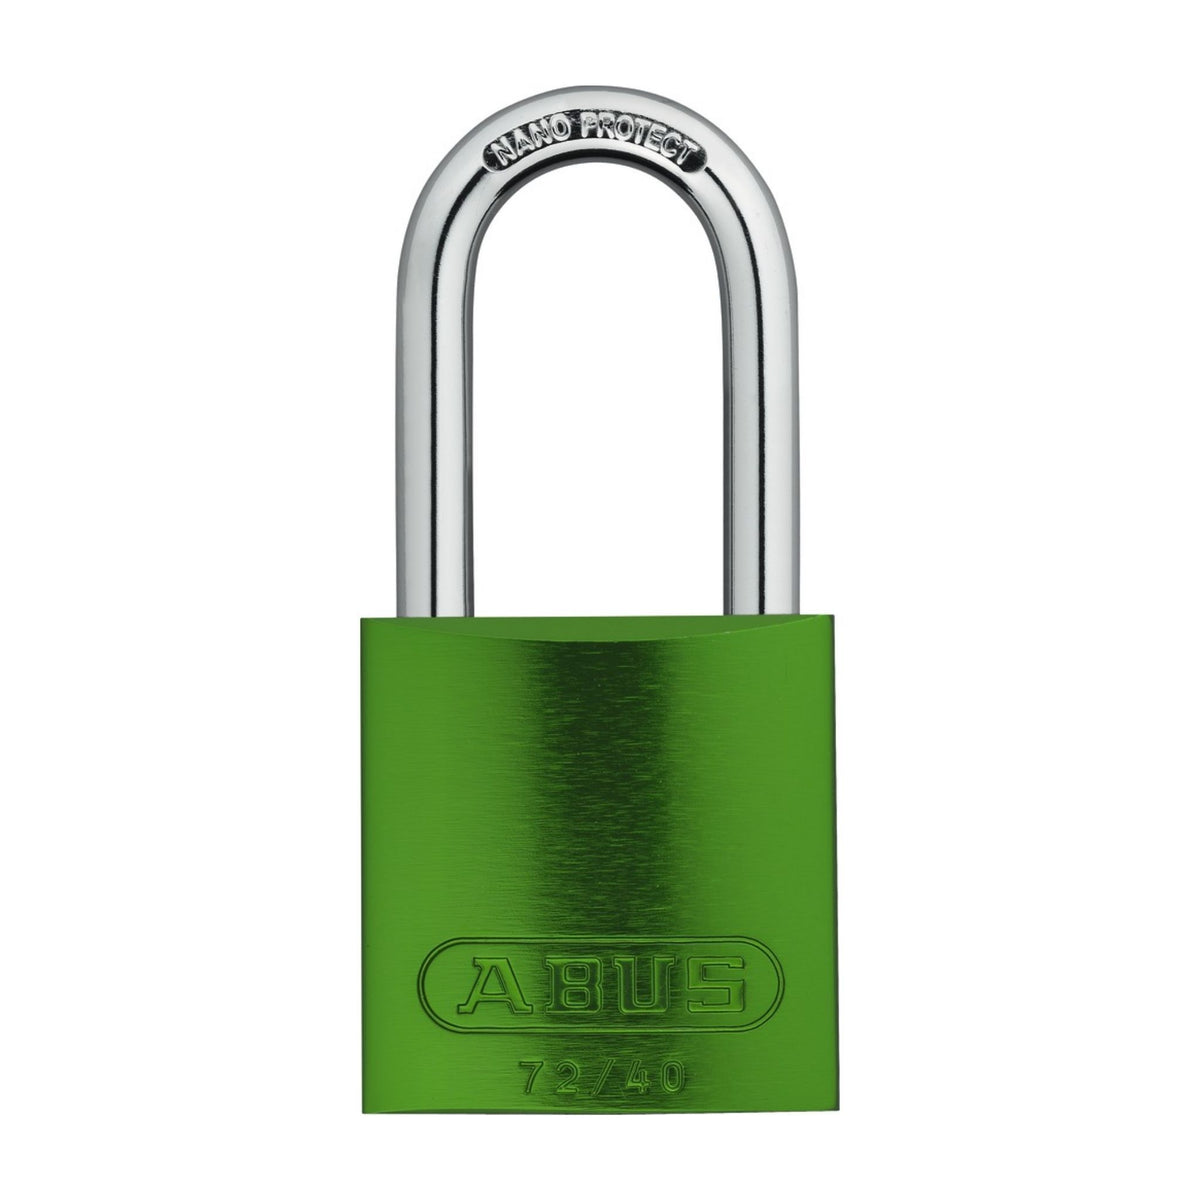 Abus 72/40HB40 KD Green Titalium Safety Padlock with 1-1/2&quot; Shackle - The Lock Source